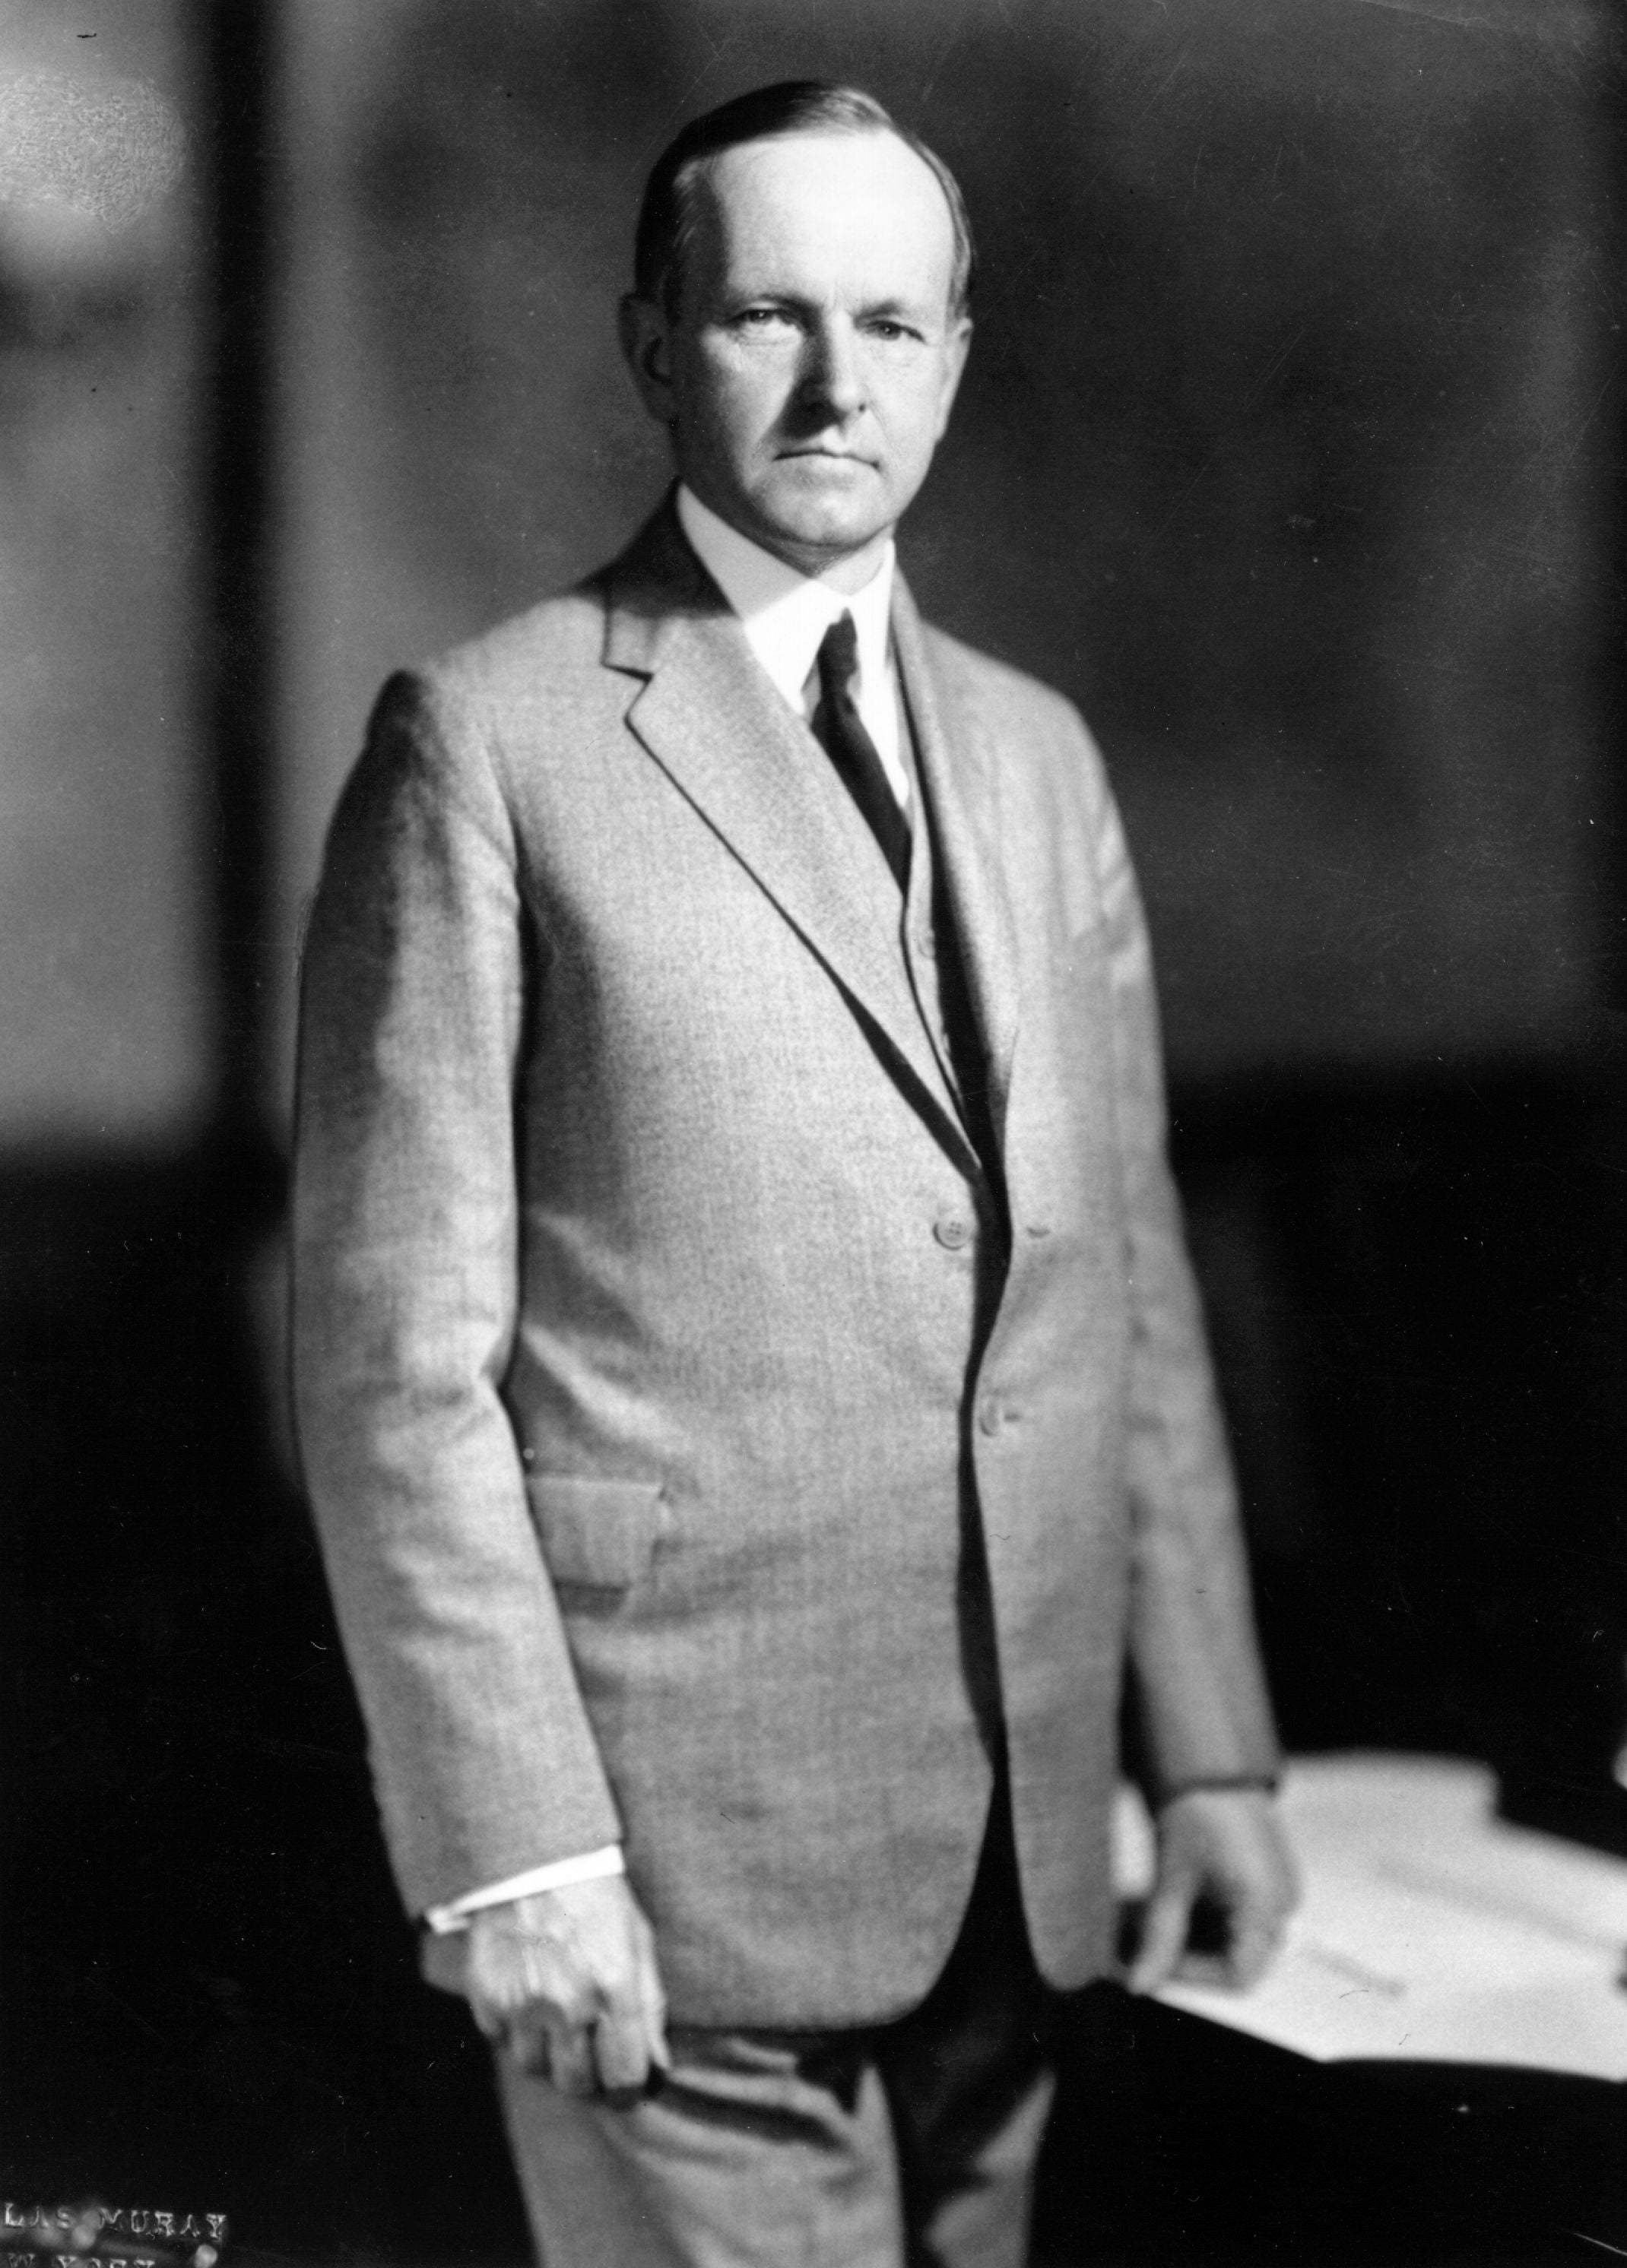 Calvin Coolidge (1872-1933) was the 30th president of the United States of America. He declined to run for re-election in 1928